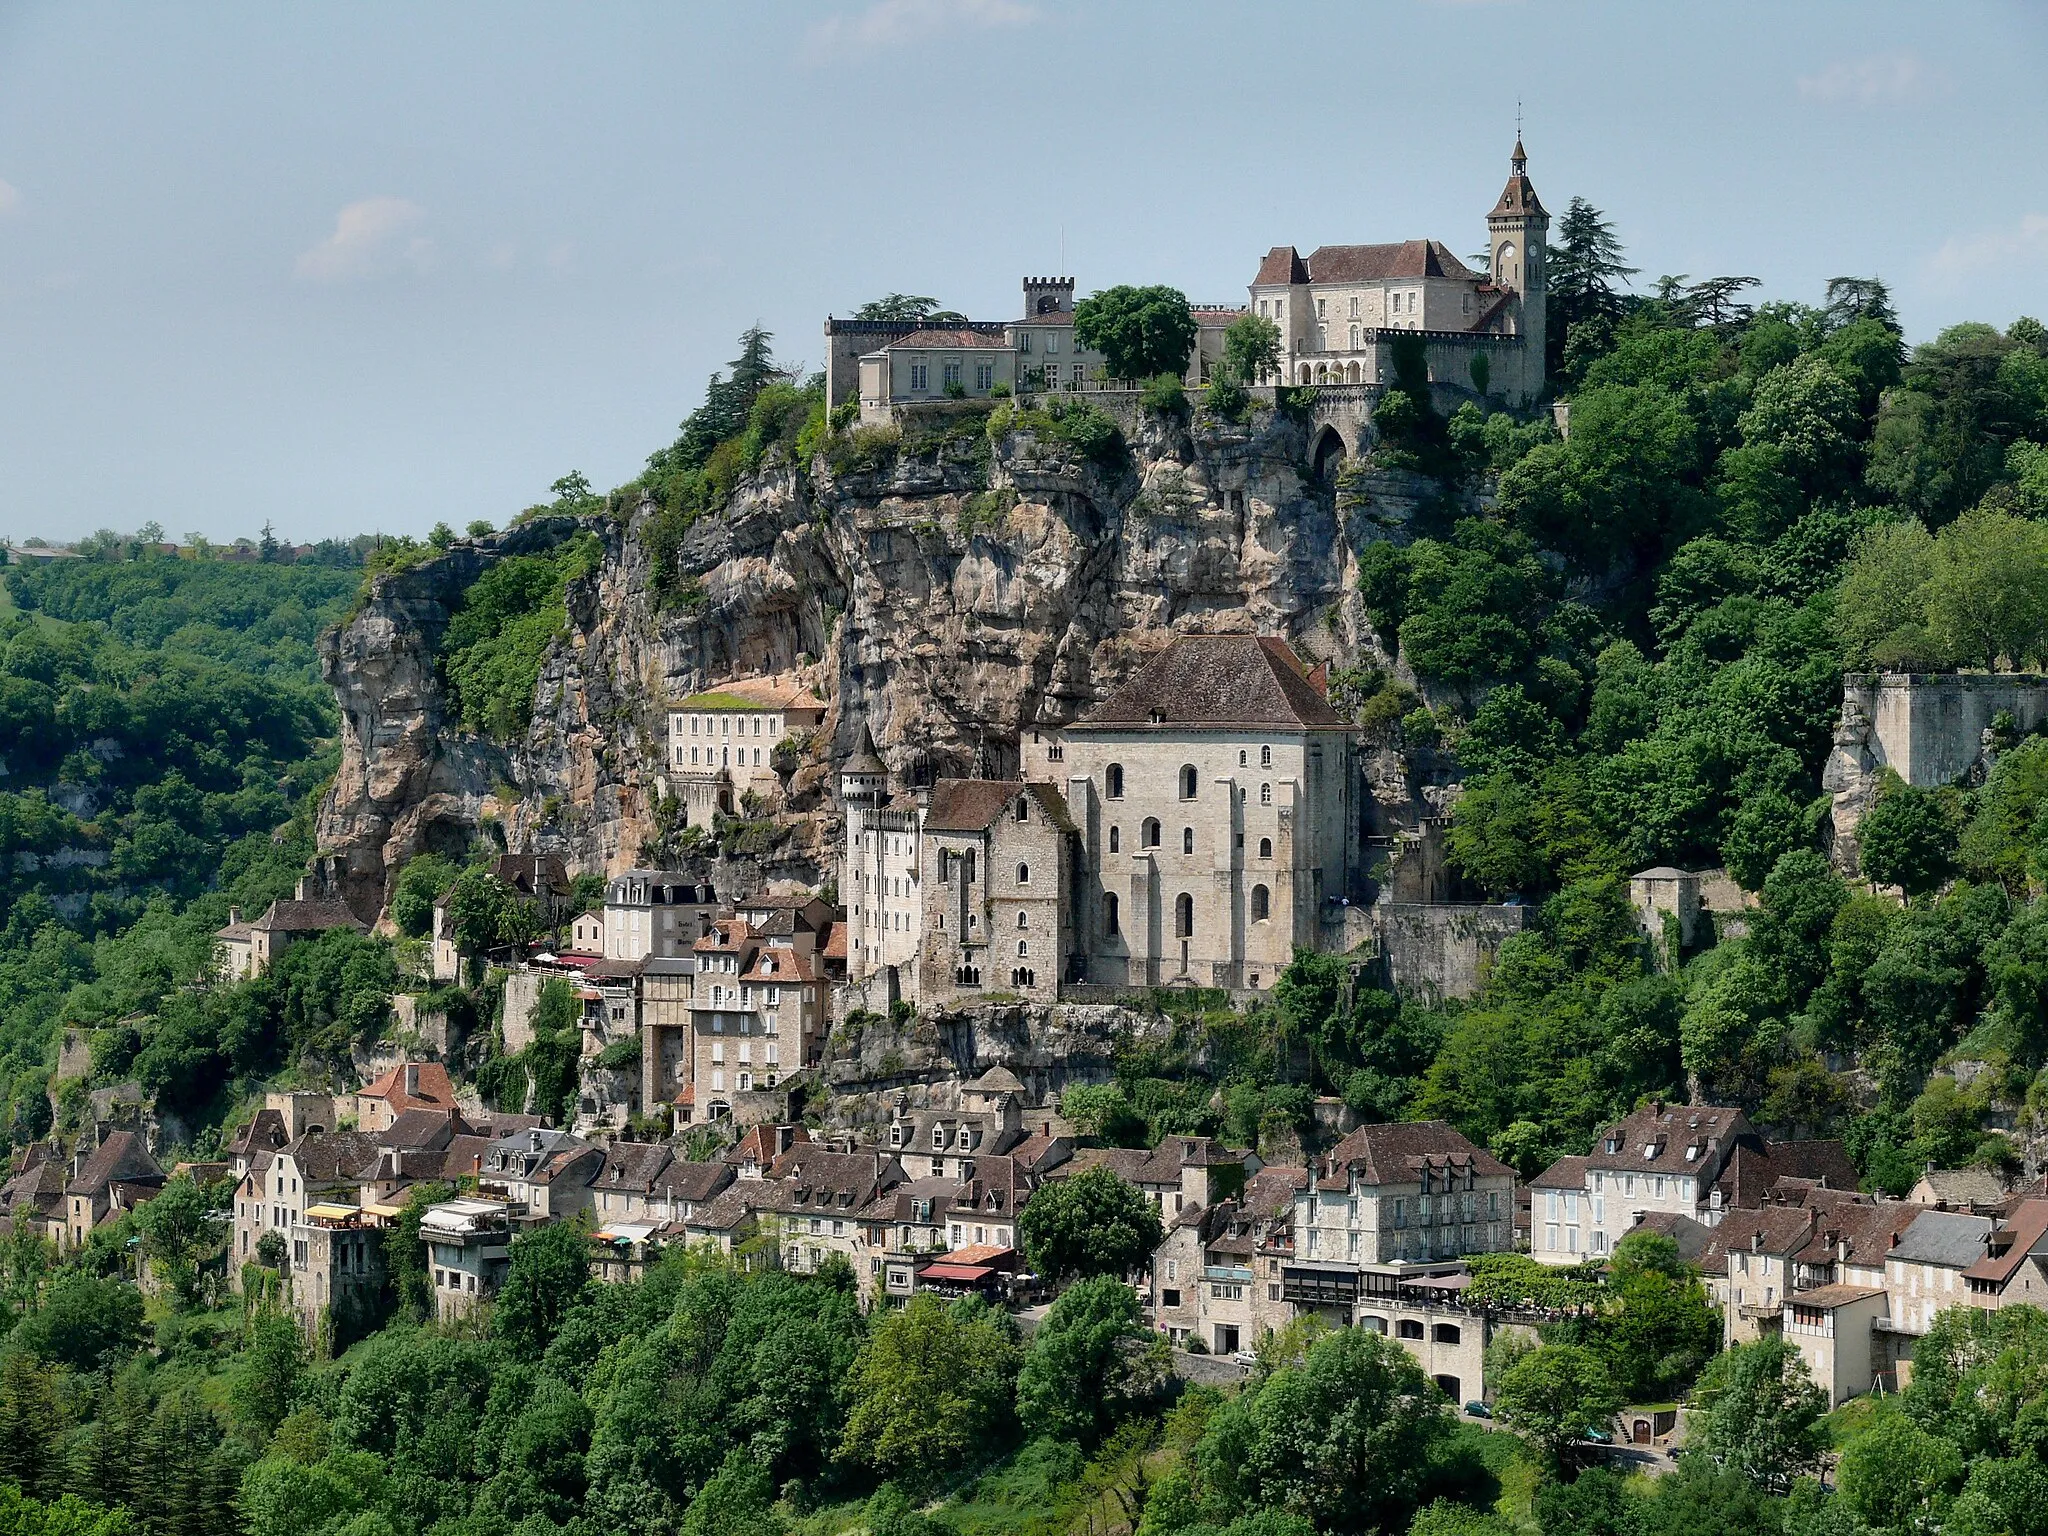 Photo showing: Rocamadour, was built on a rock wall at a point where the mummified body of an old hermit was discovered. In the middle ages, people believed this was a miracle. Labeled one of the 300 "Most beautiful villages of France", Rocamadour is a true jewel clinging to the rock wall. Registered on UNESCO's world heritage list as a stage on the Way of St. James. Rocamadour, Lot, Midi-Pyrénées region, France, May 2008